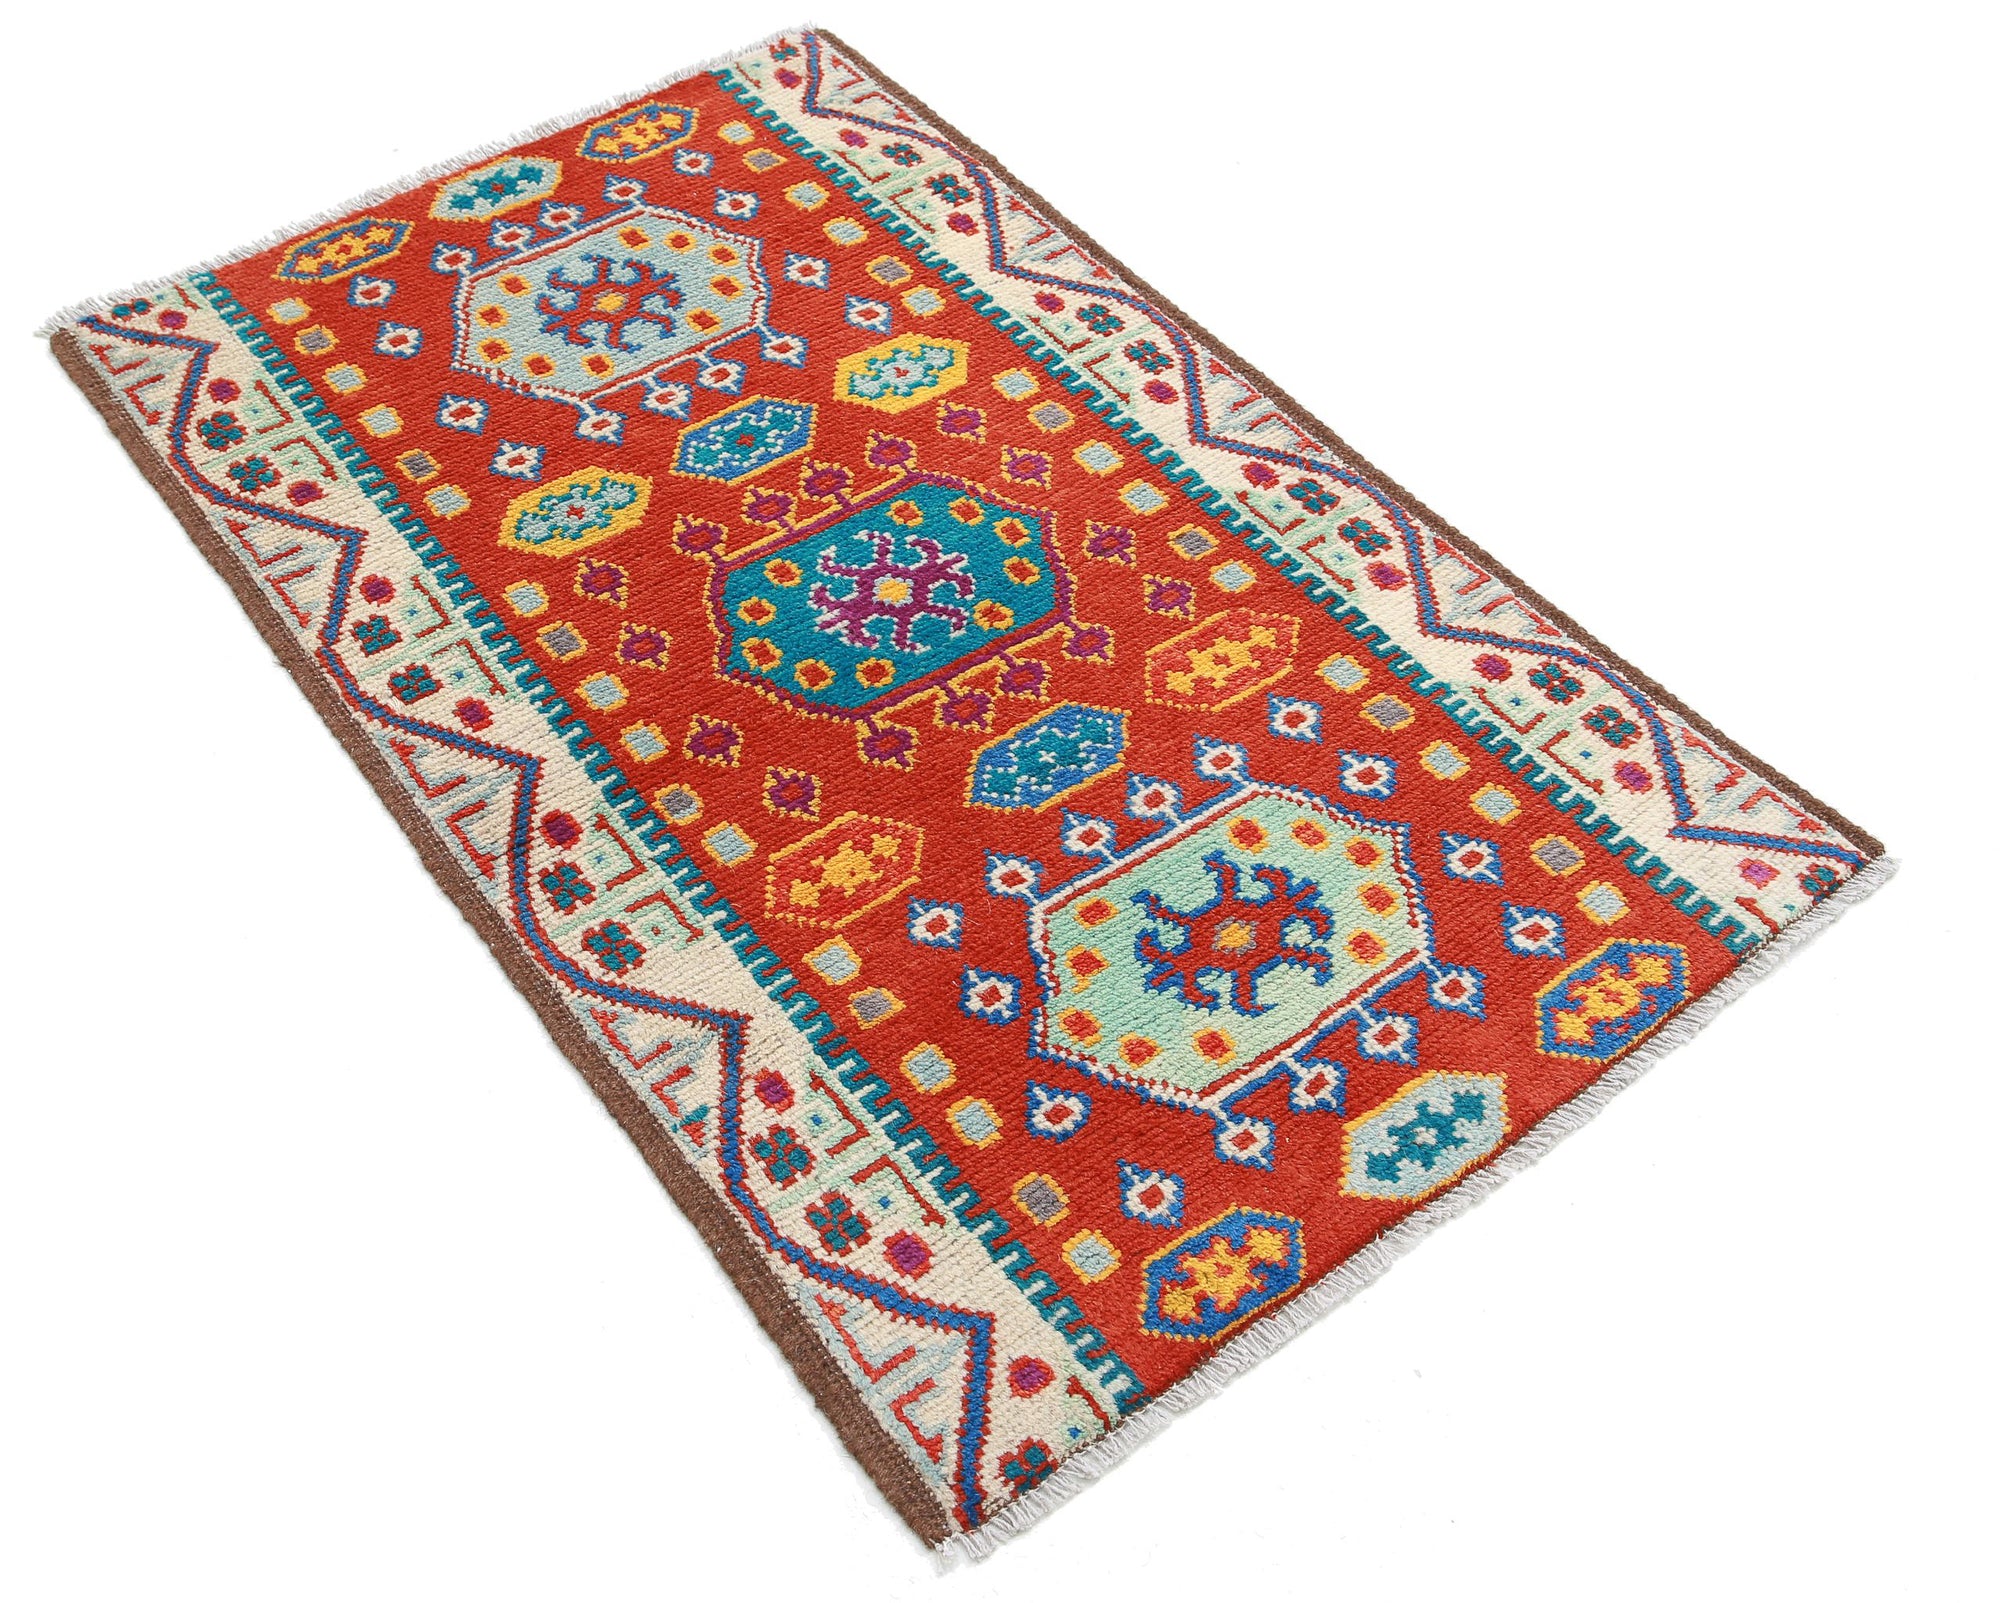 Revival-hand-knotted-qarghani-wool-rug-5014188-1.jpg